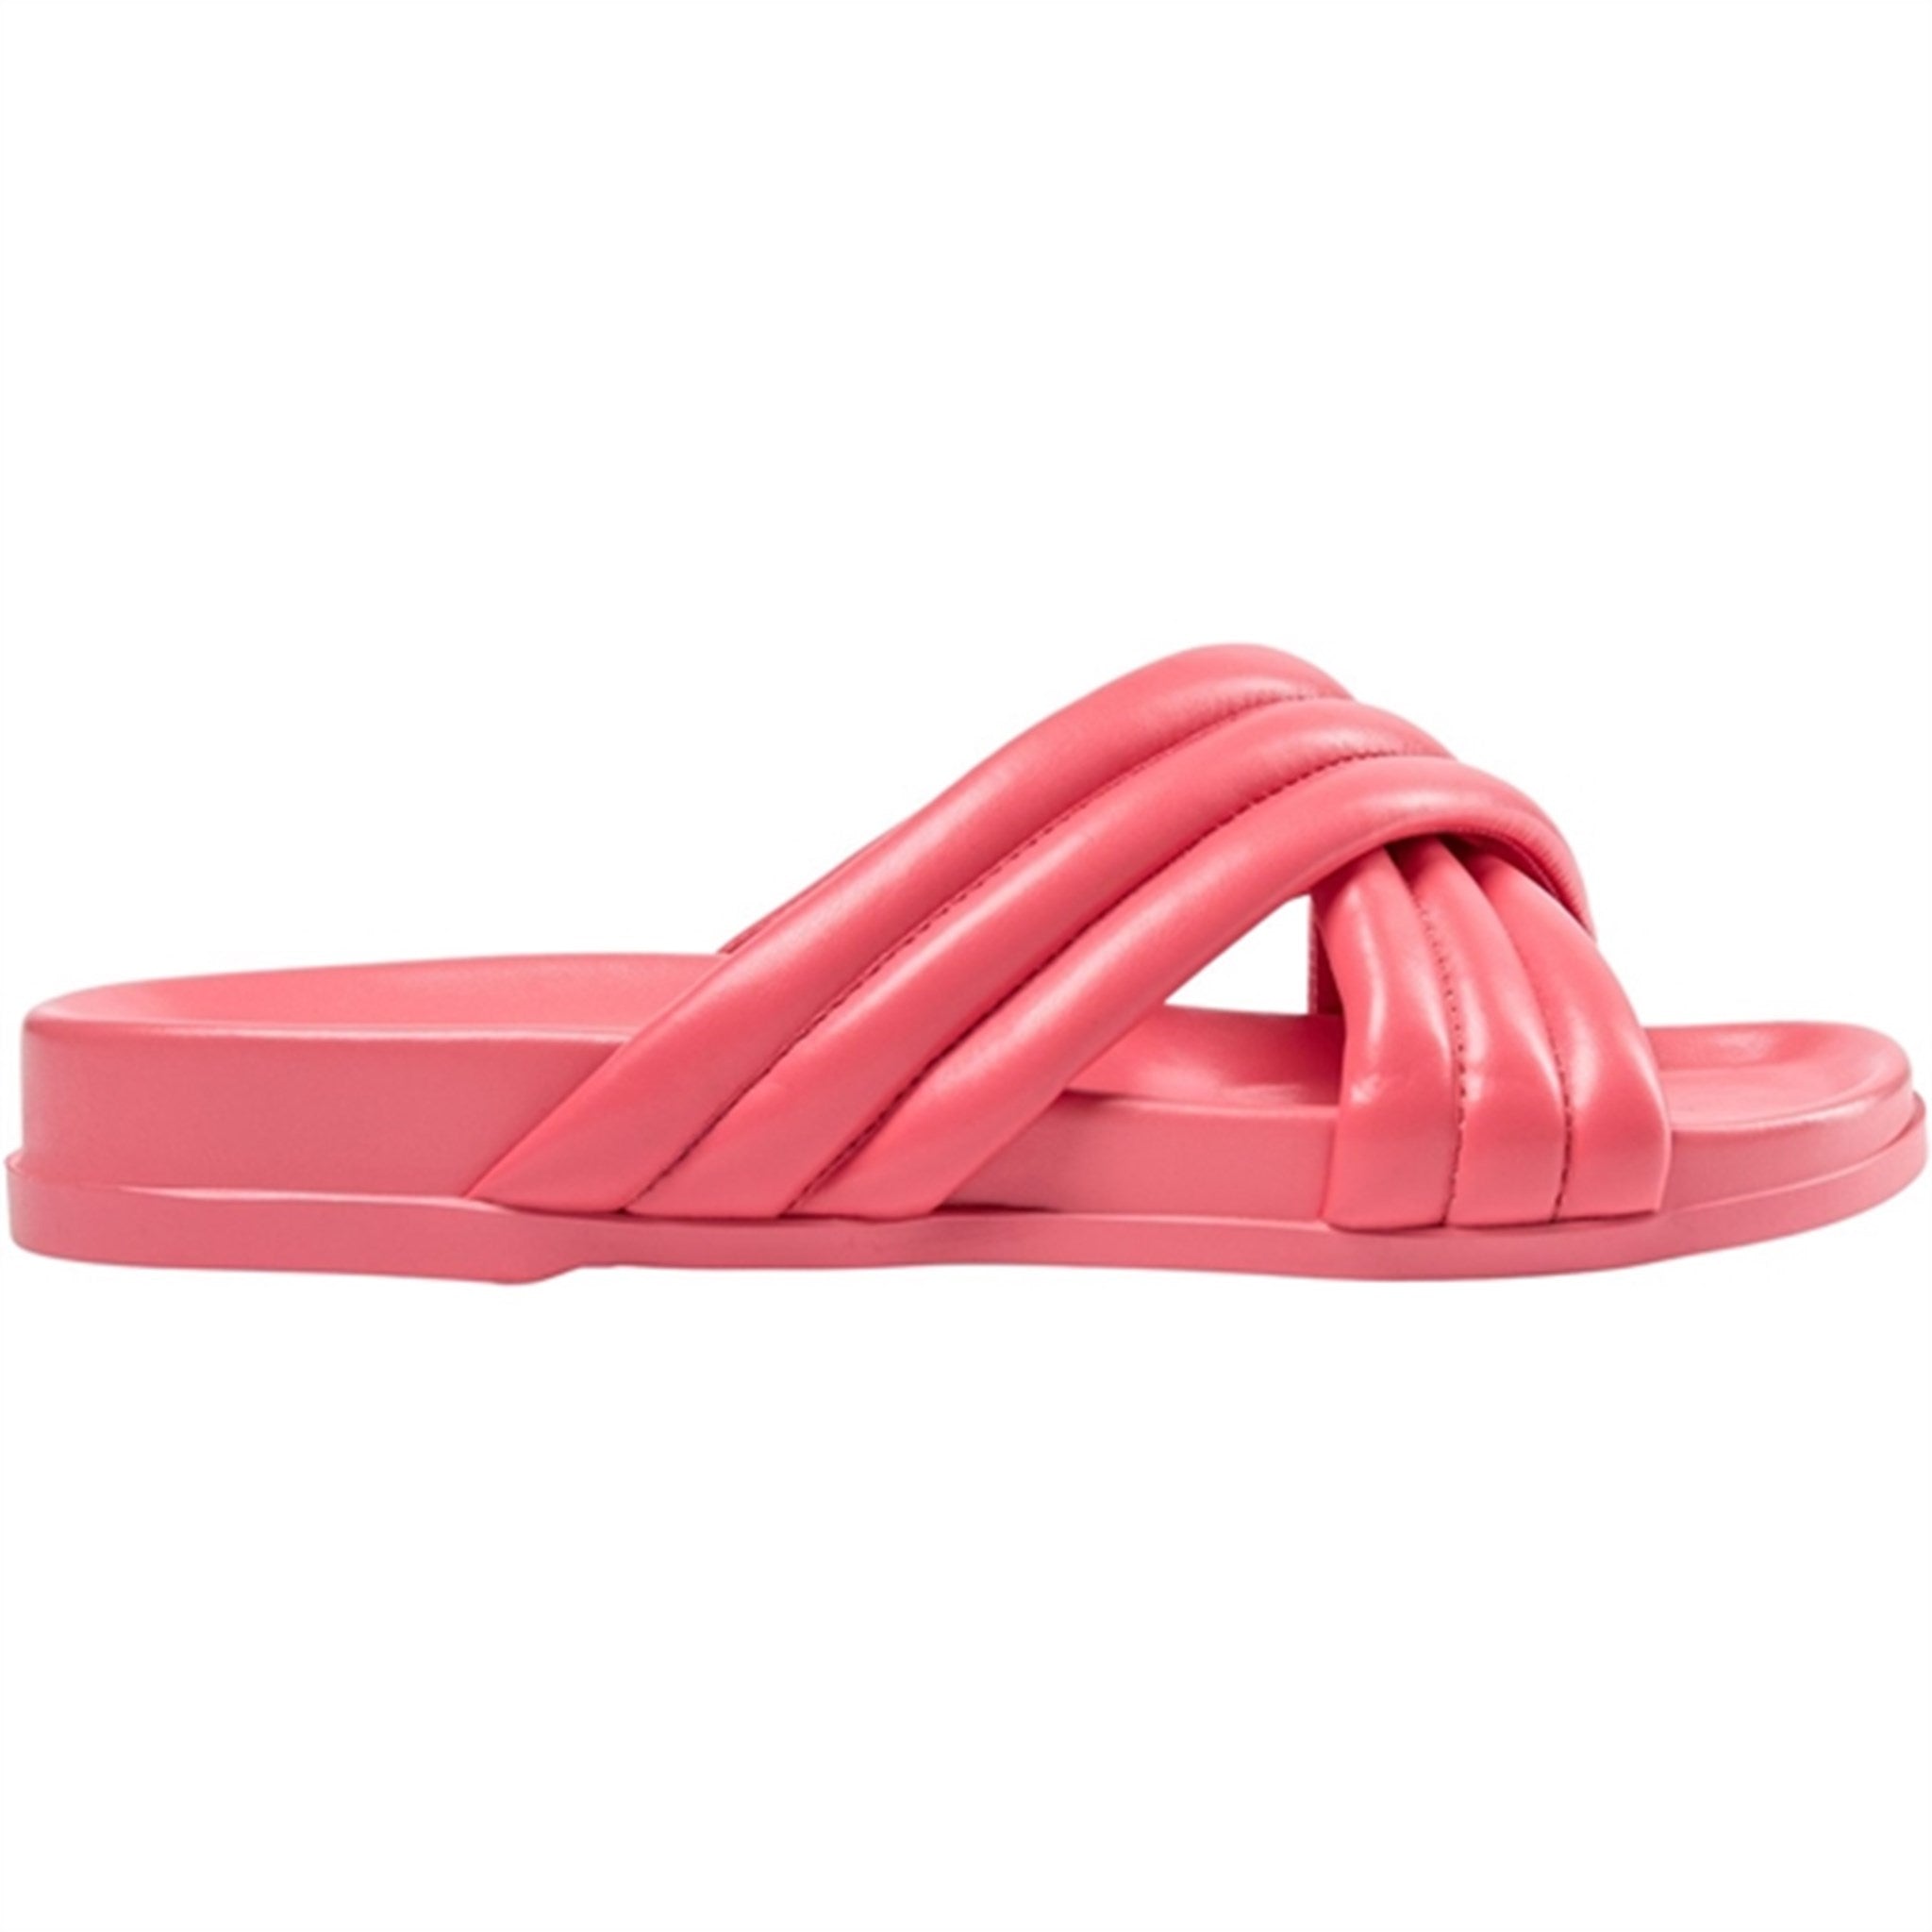 Sofie Schnoor Young Sandal Coral pink